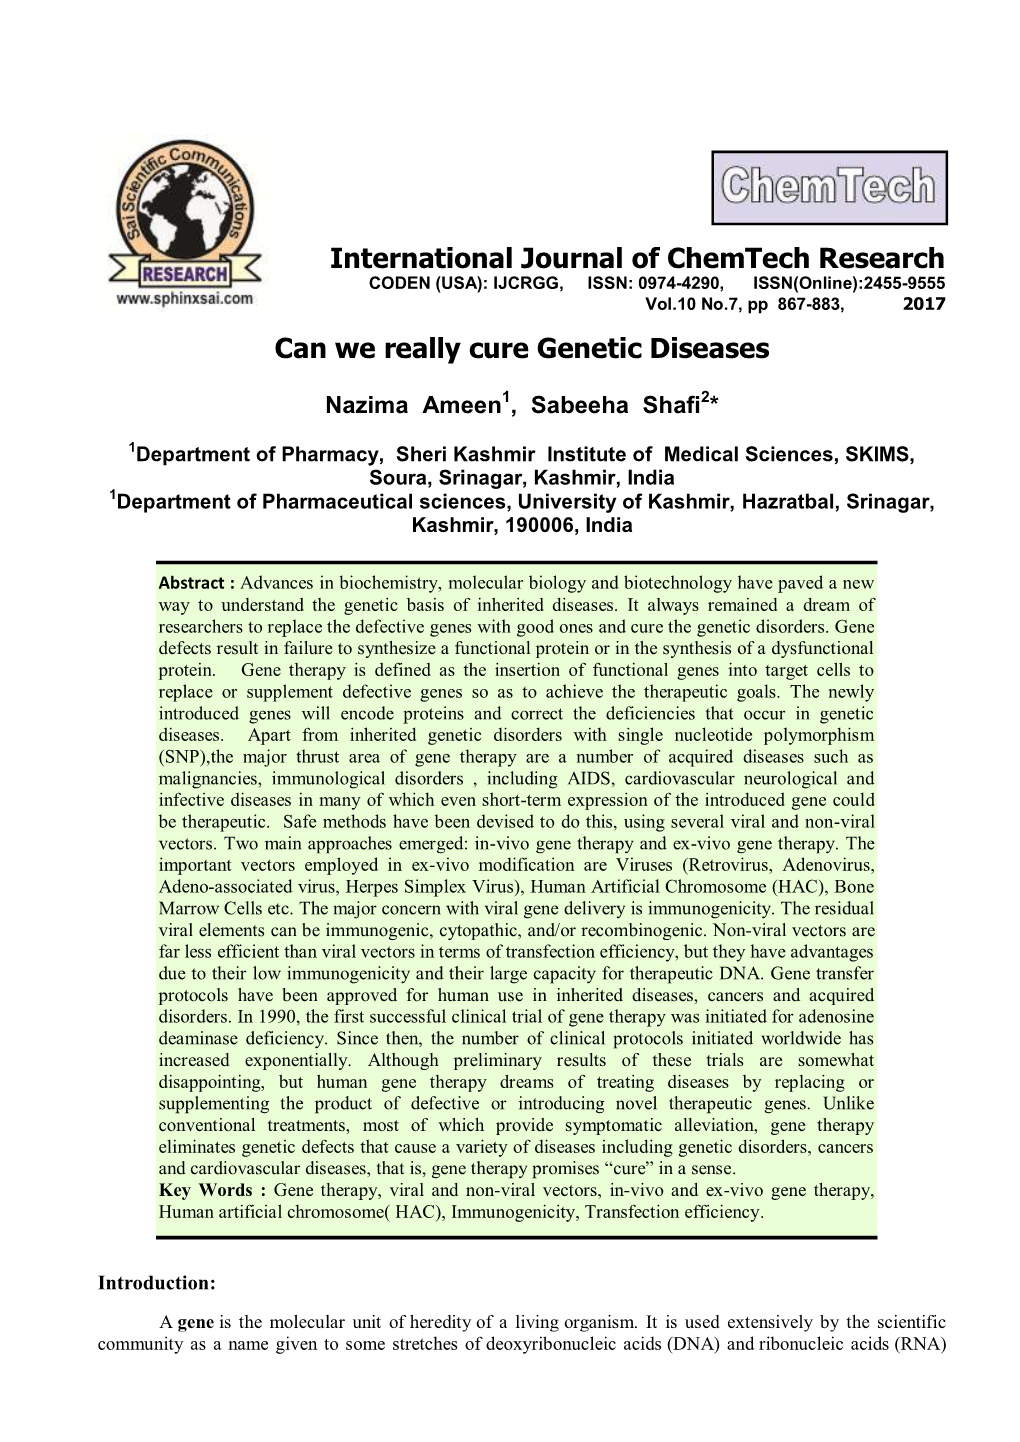 Can We Really Cure Genetic Diseases International Journal of Chemtech